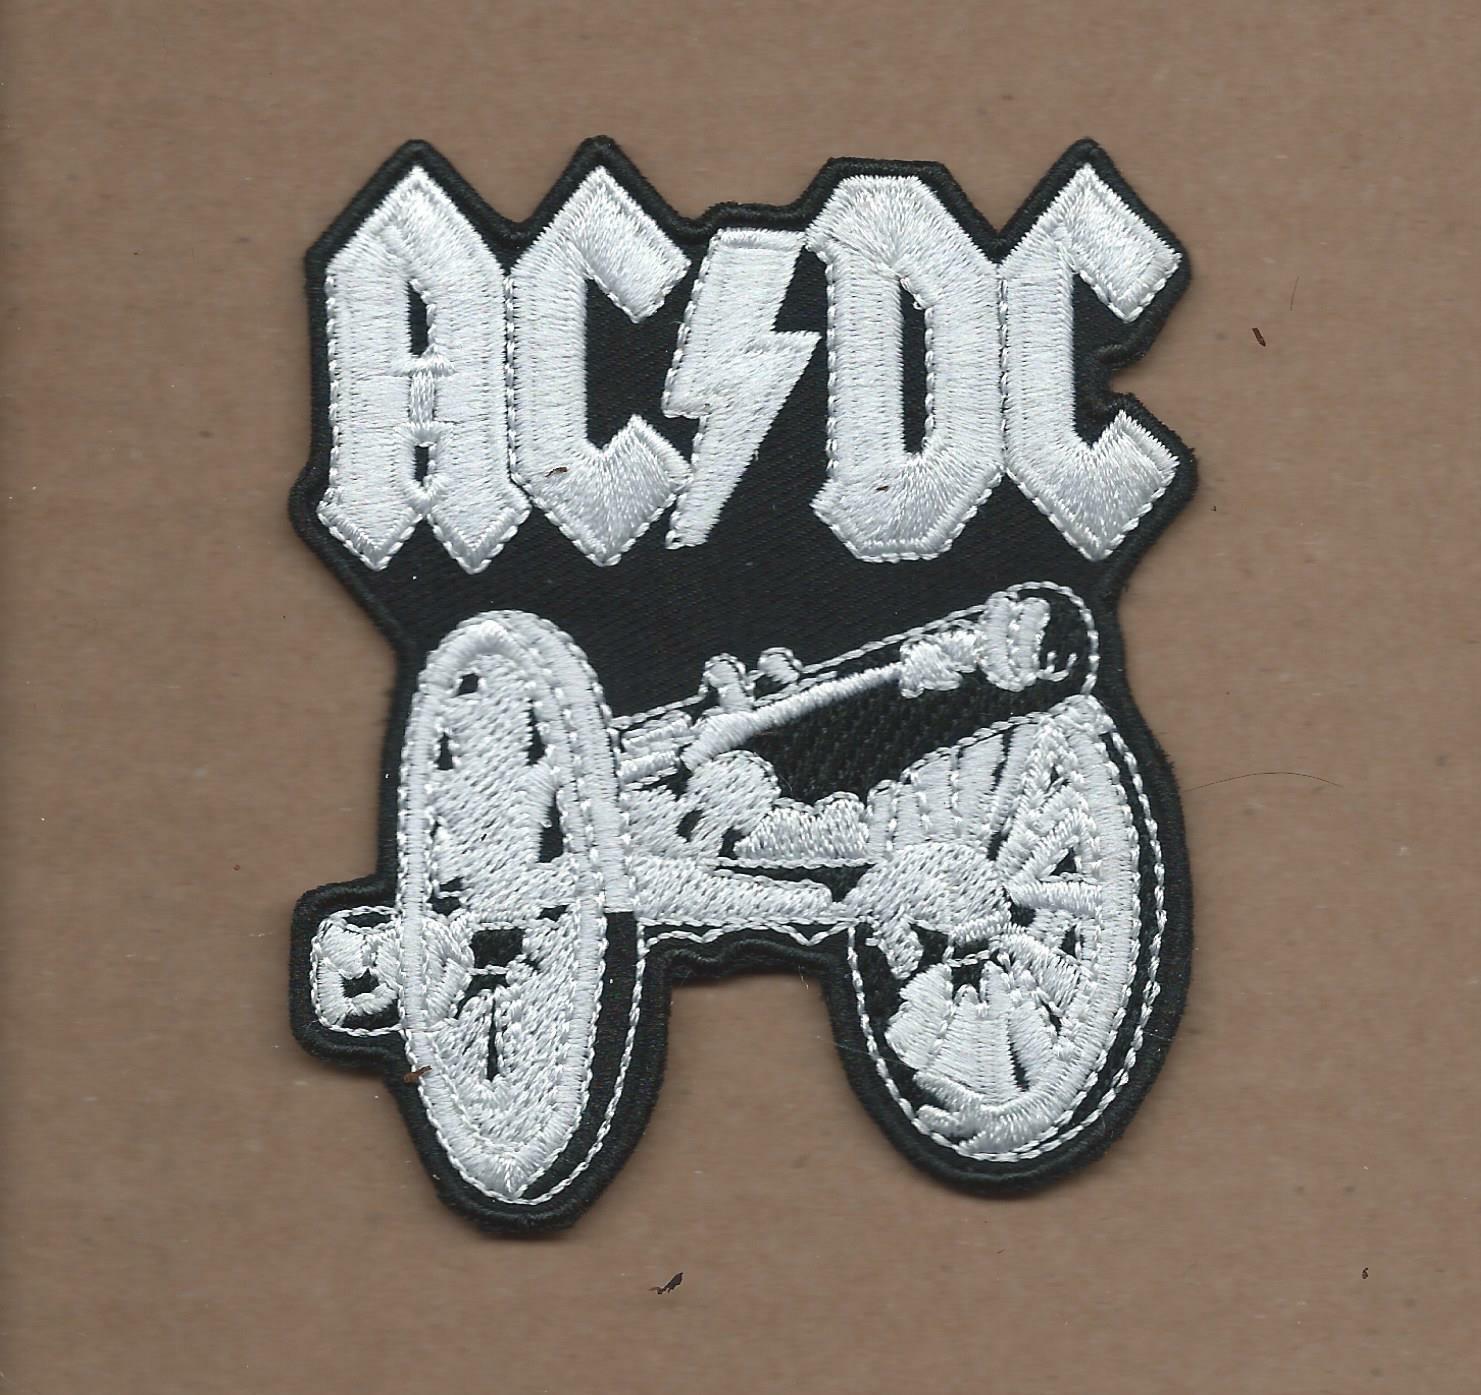 New 3 X 3 1/2 Inch Ac/dc W/cannon Iron On Patch Free Shipping